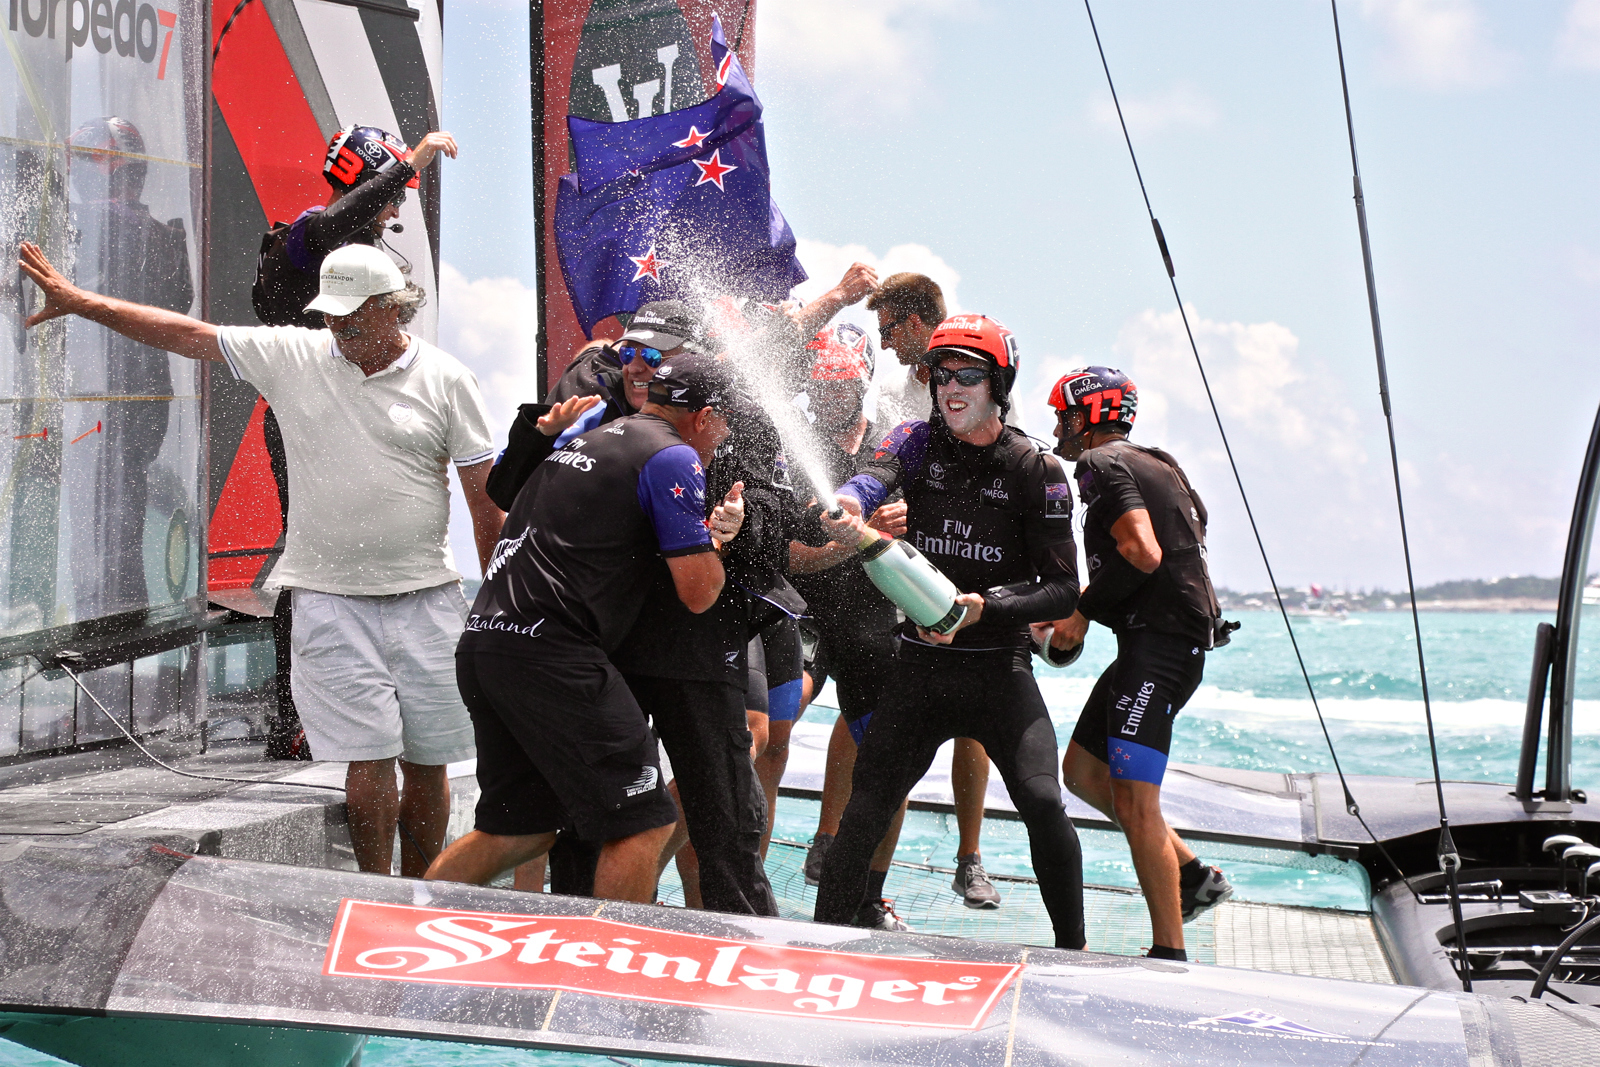 The Louis Vuitton America's Cup World Series – Bermuda 2017 ‹ The